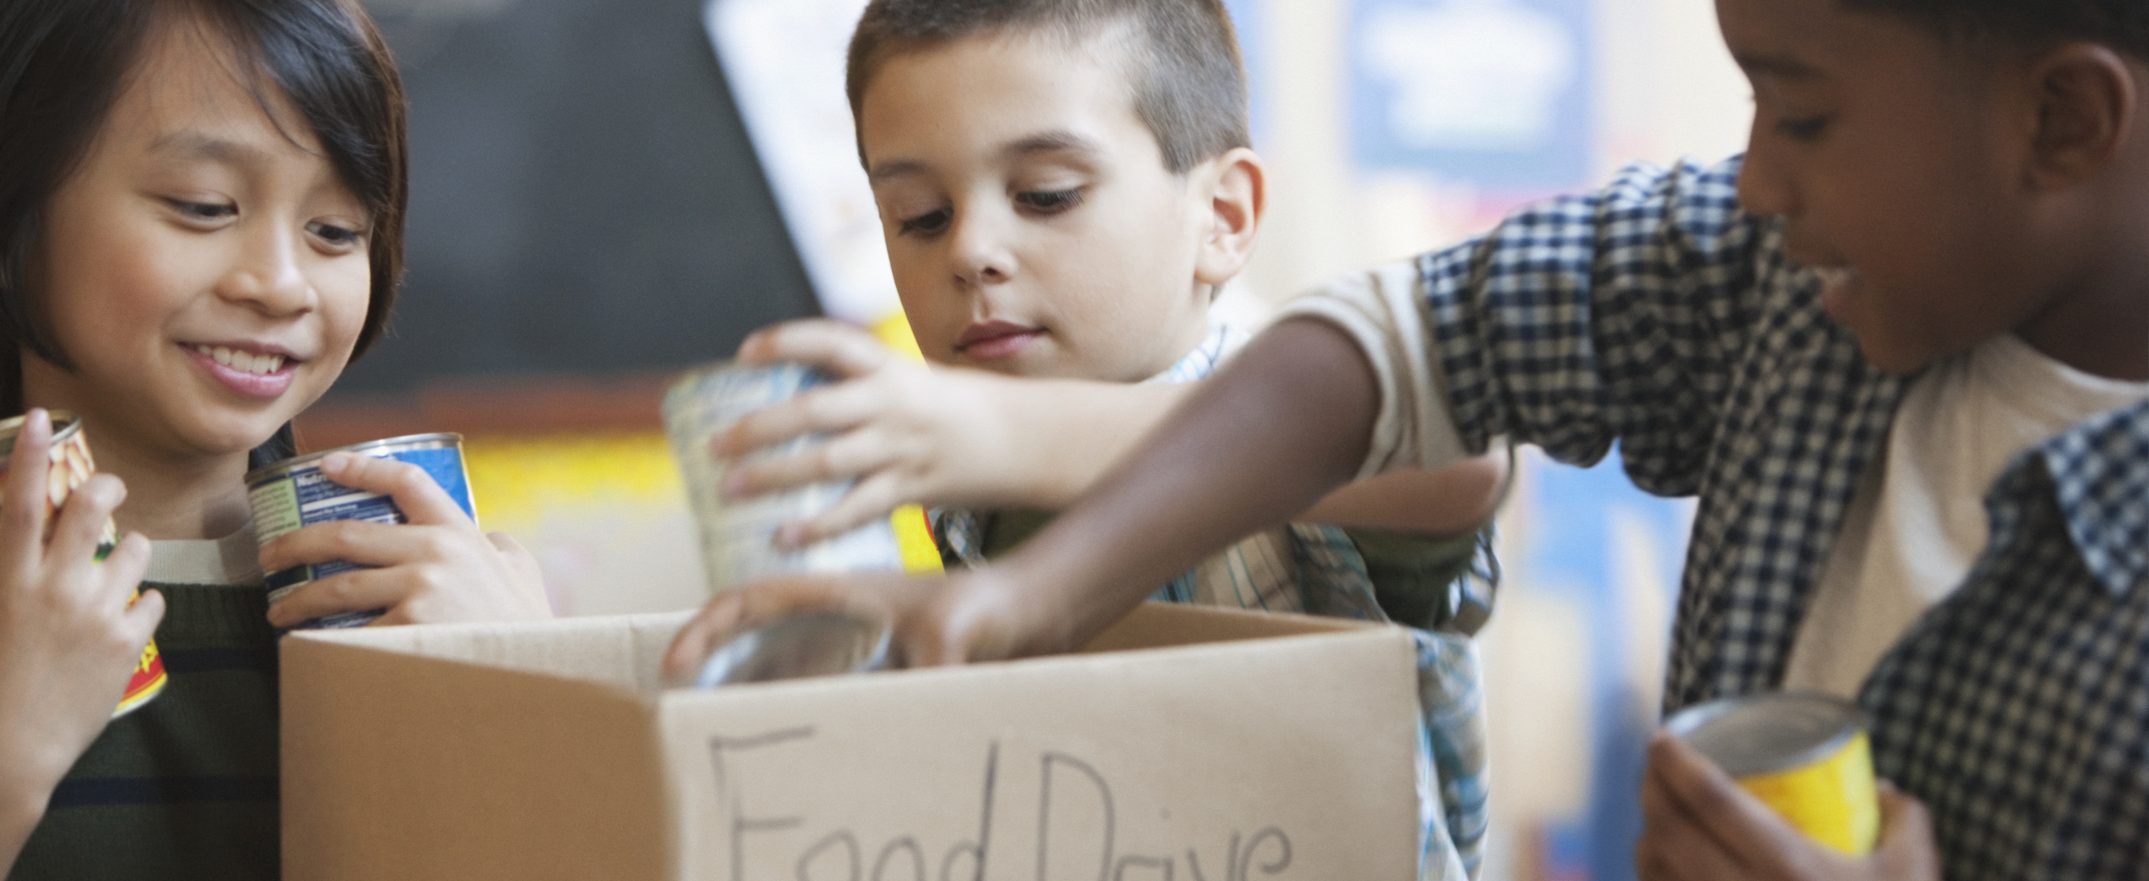 Three young kids place cans of food into a cardboard box marked “Food Drive.”